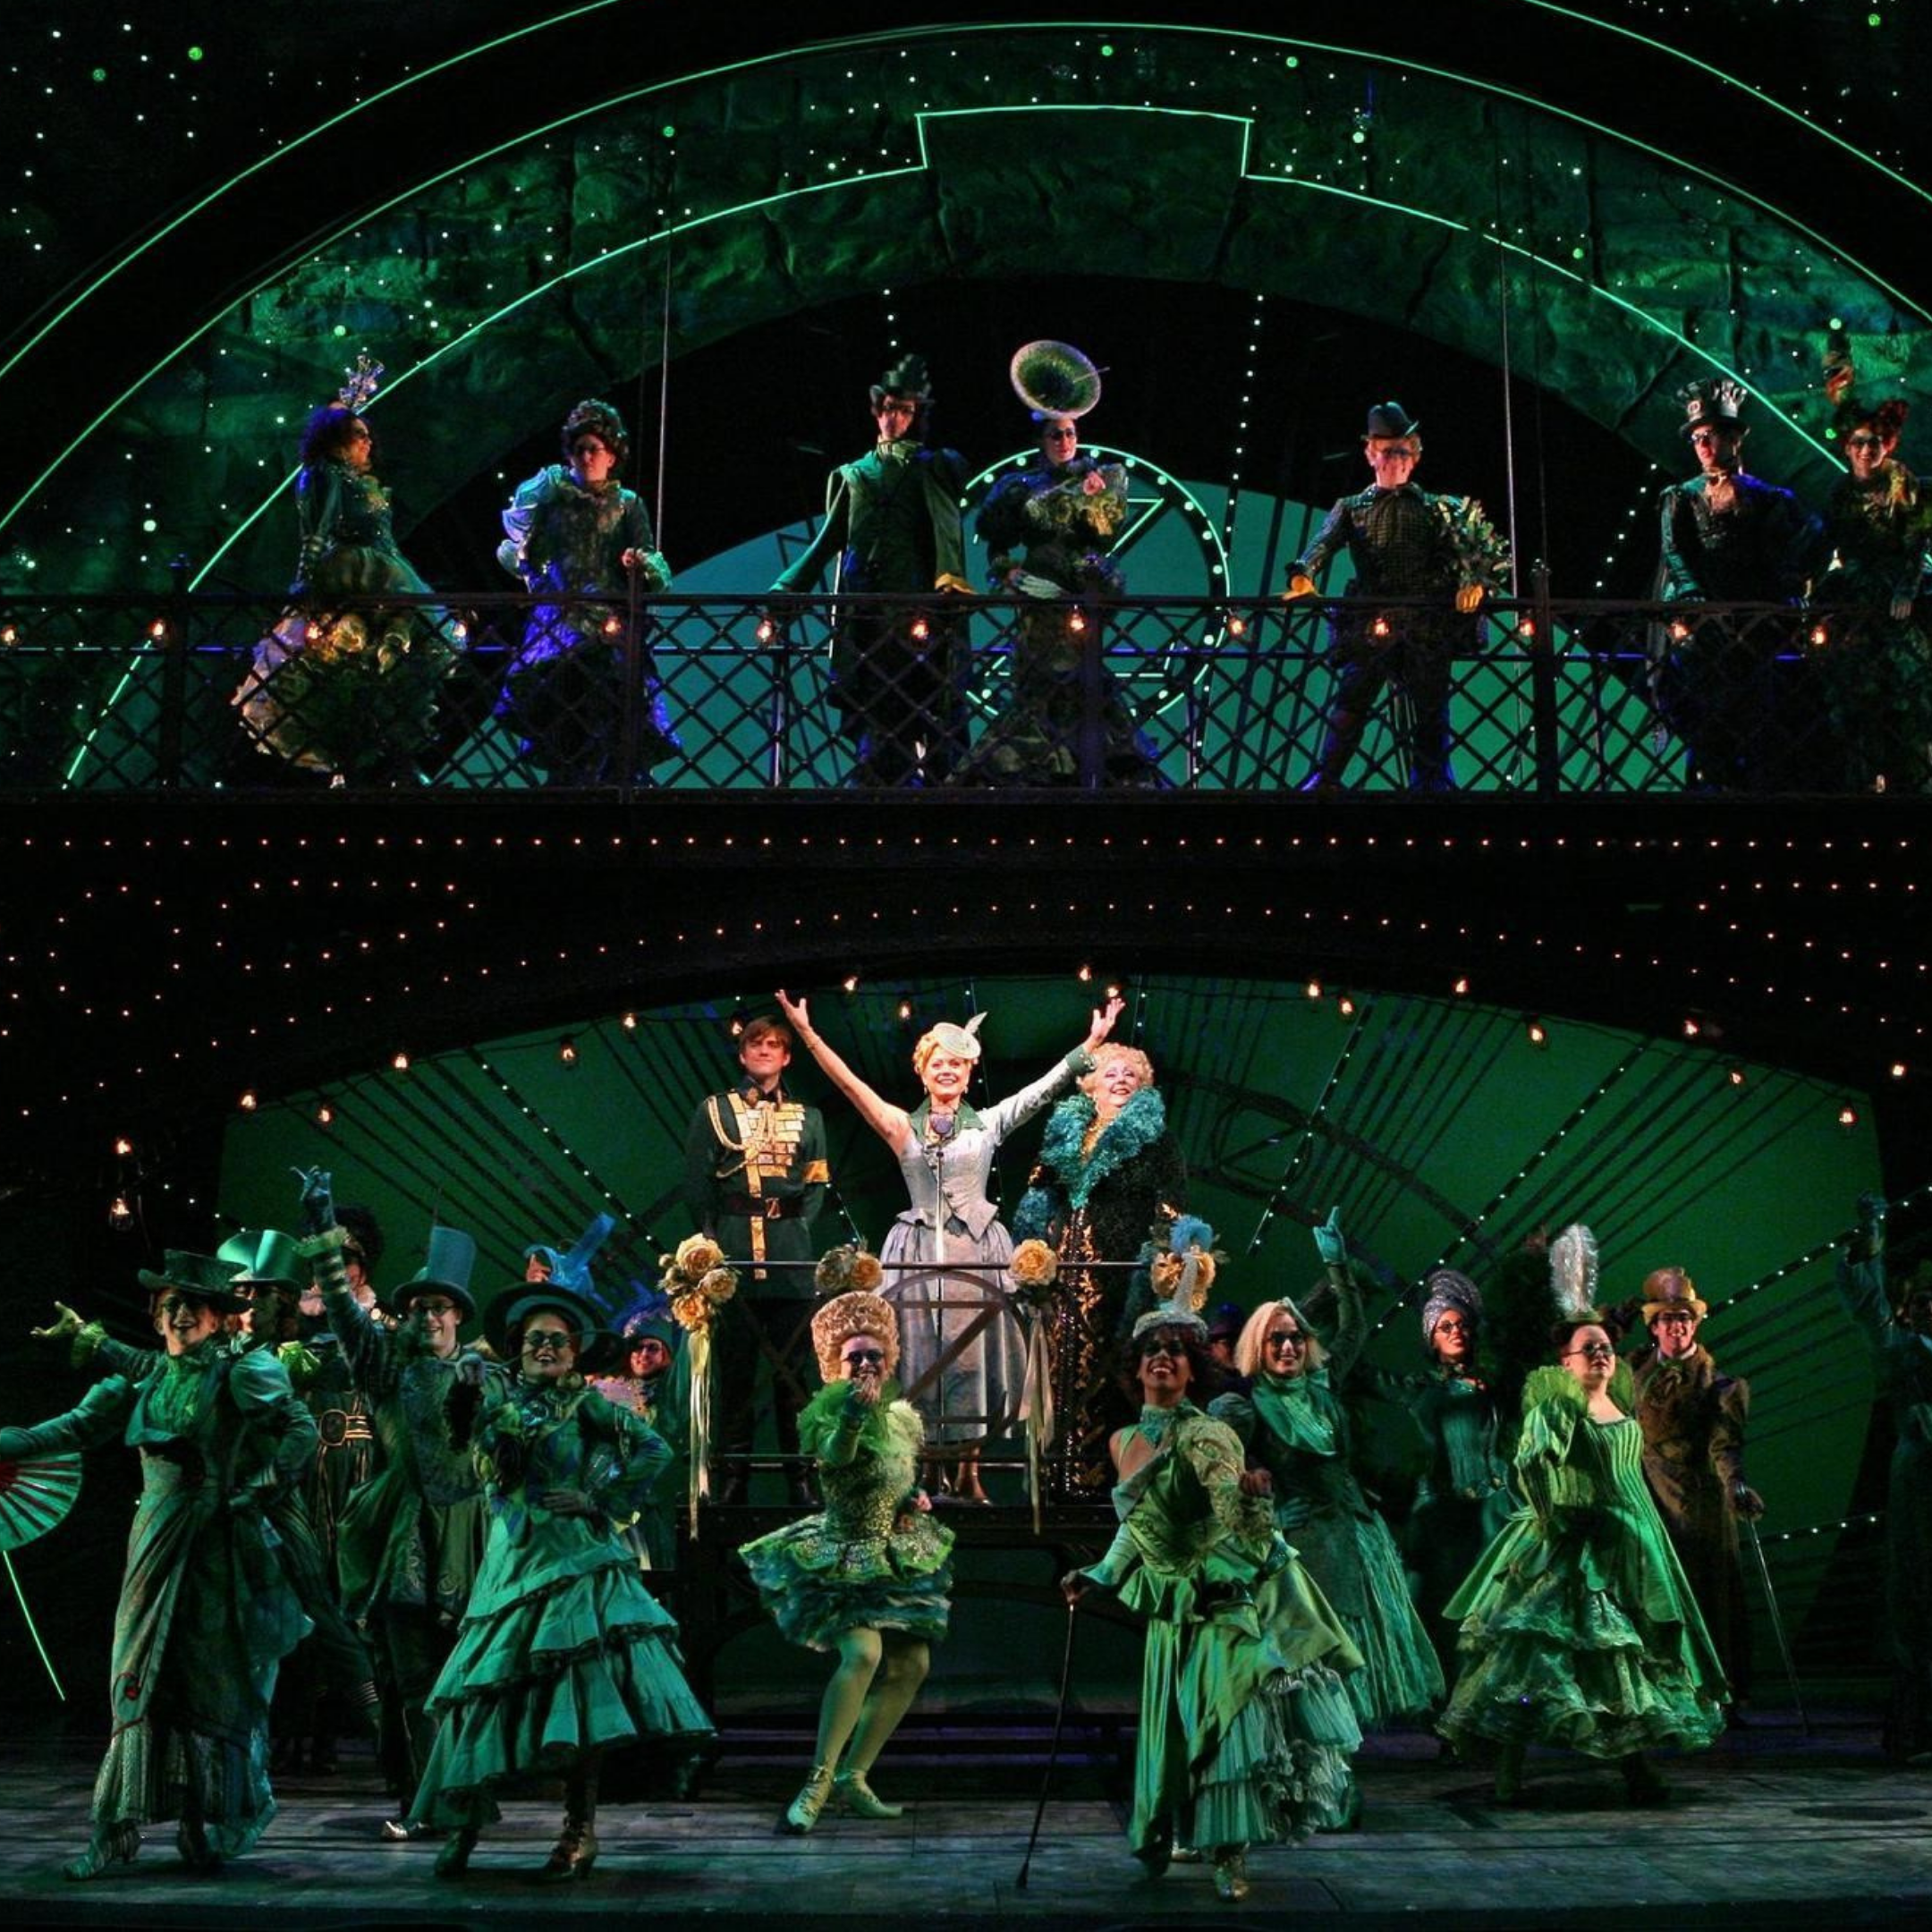 WICKED cast members performing a musical number on stage.